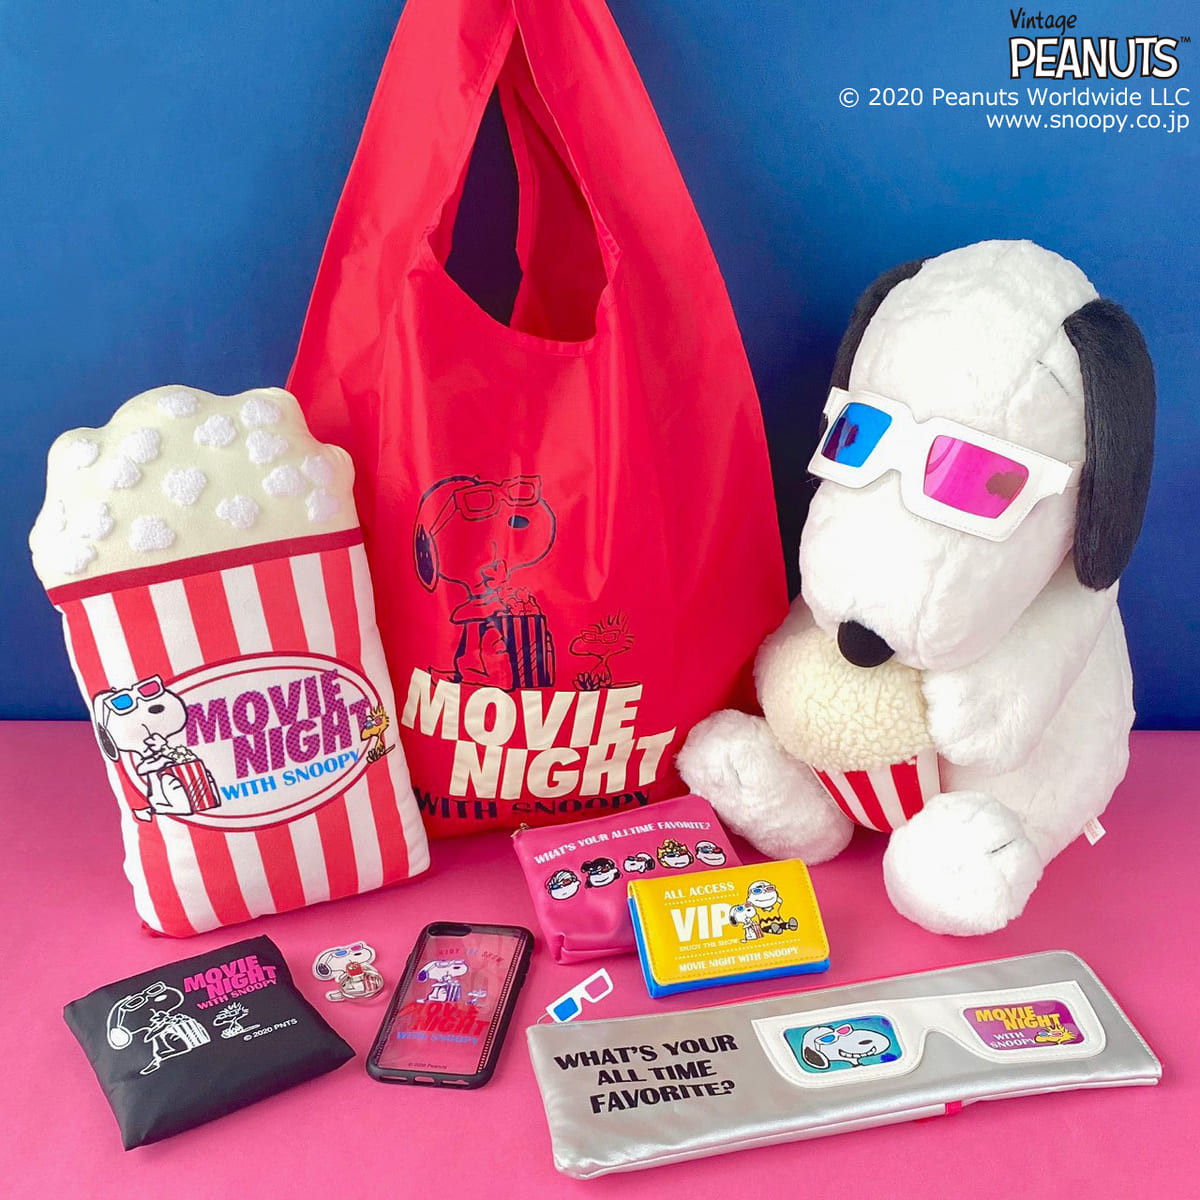 PLAZAのPEANUTSプロモーション「MOVIE NIGHT WITH SNOOPY」